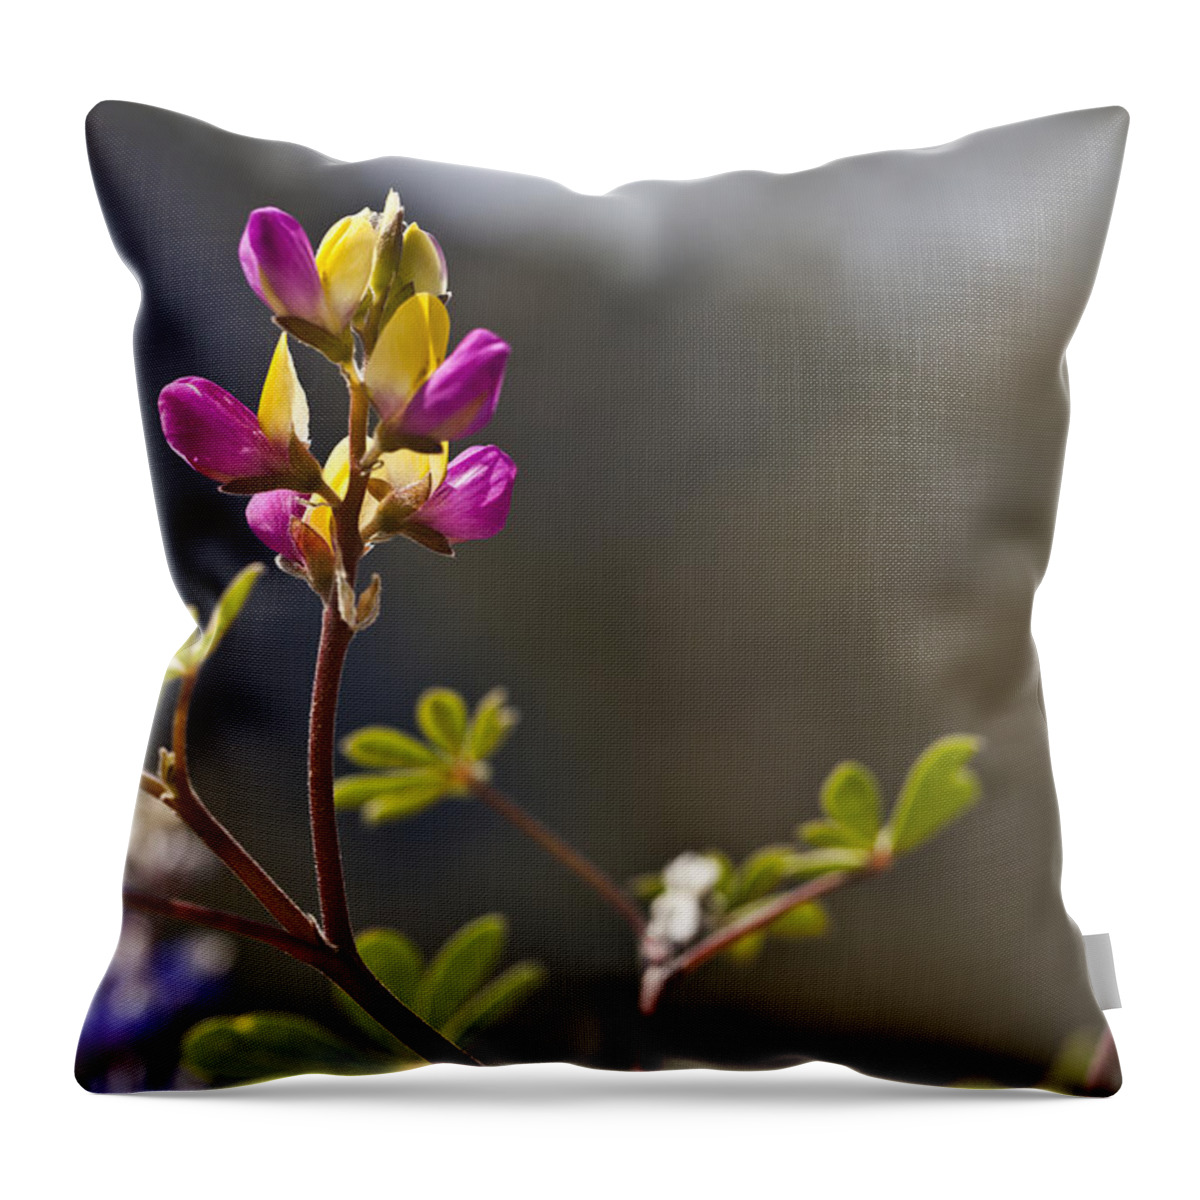 Scenery Throw Pillow featuring the photograph Right Side Up by Jon Glaser